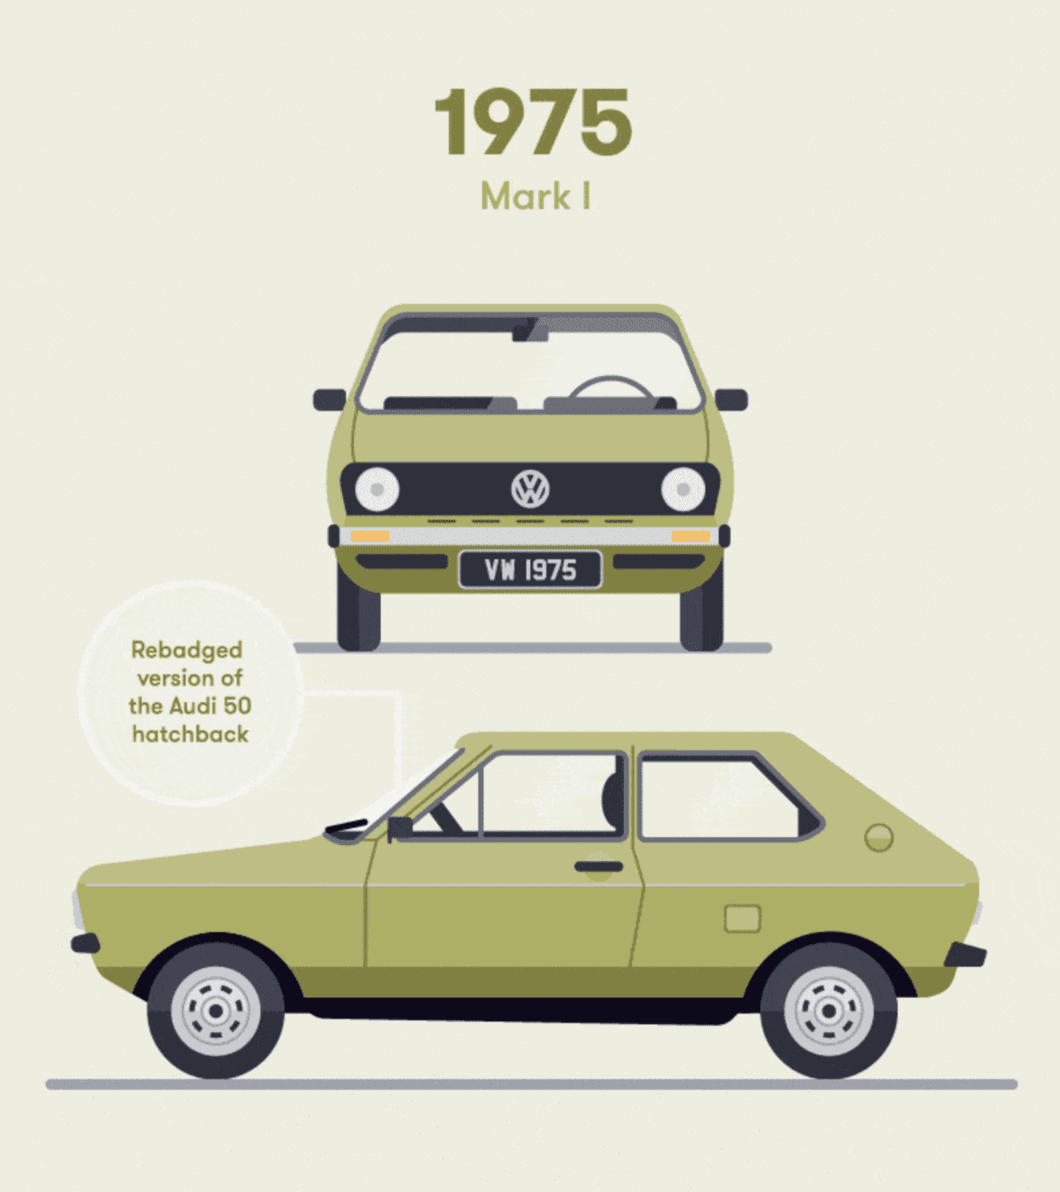 Volkswagen Polo 43-year history captured in less than 40 seconds